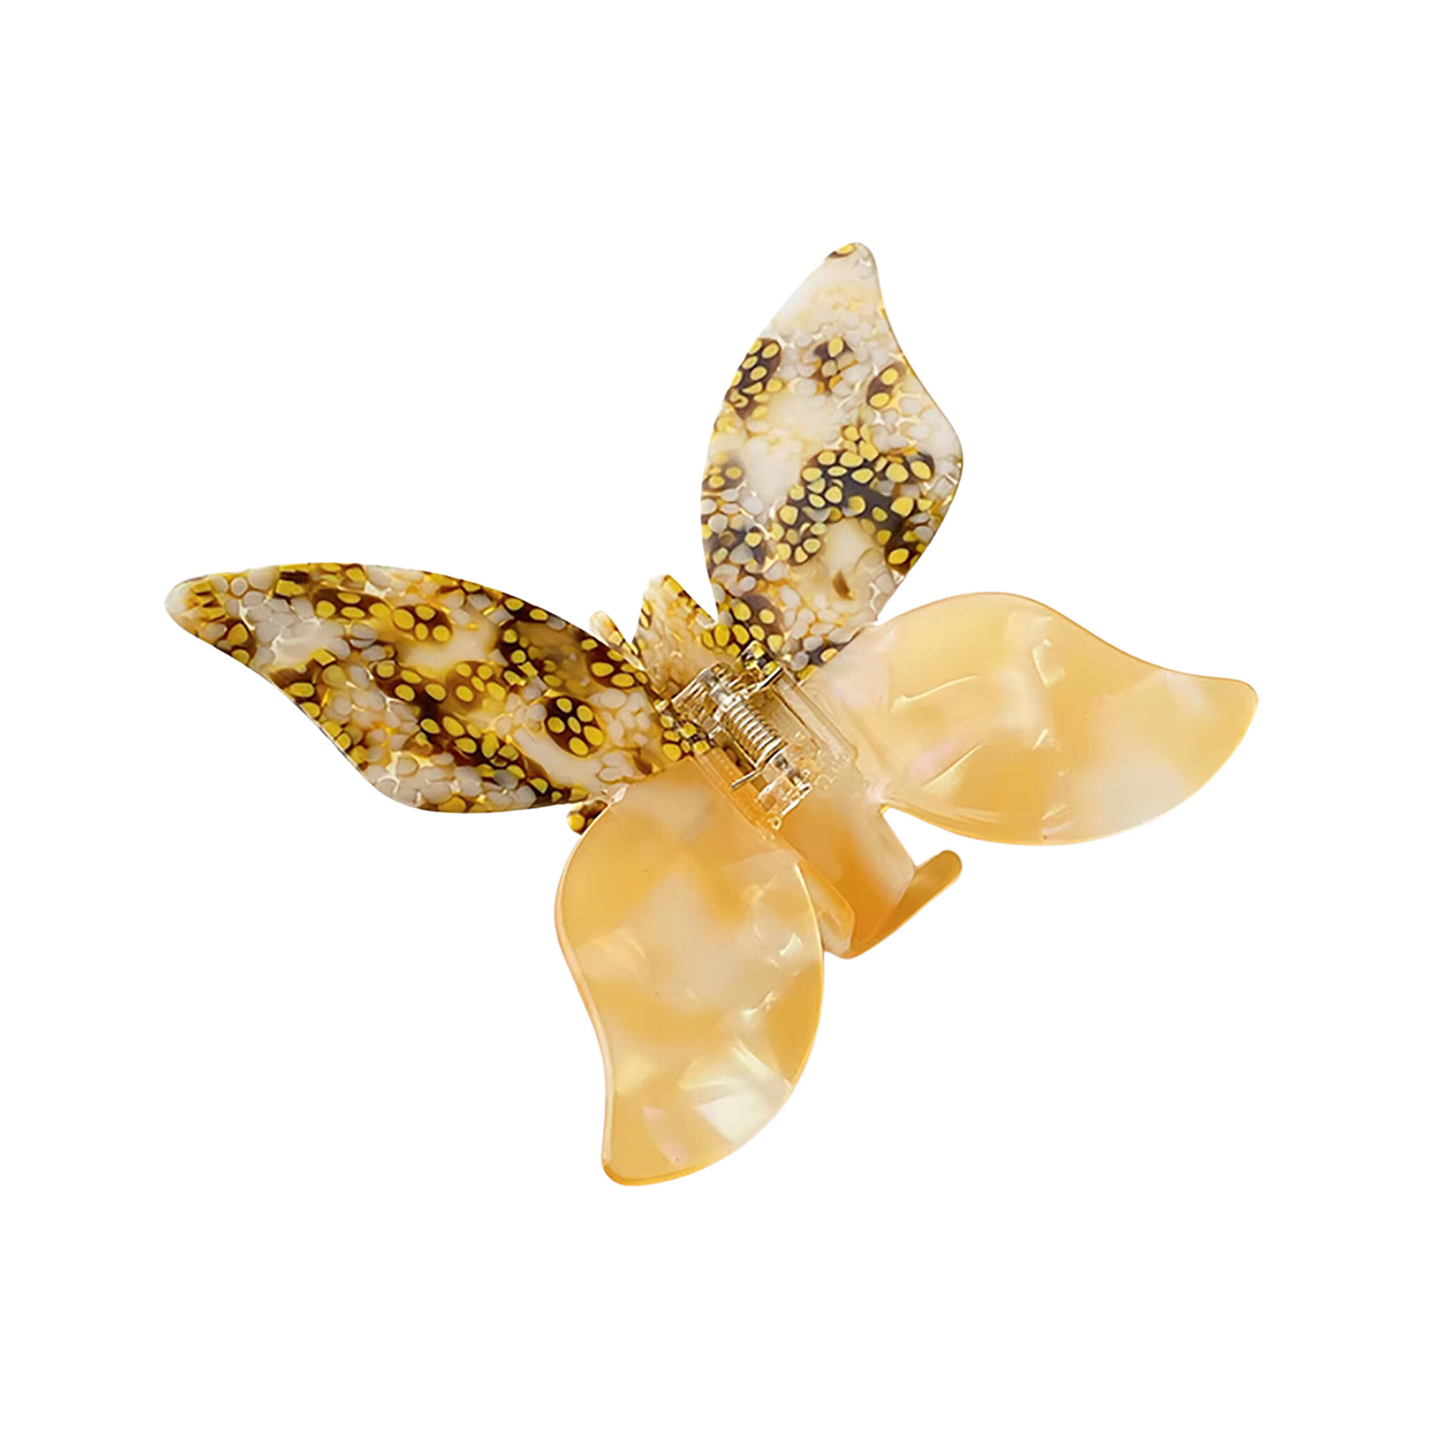 Bella Cellulose Acetate Hair Claw Clips